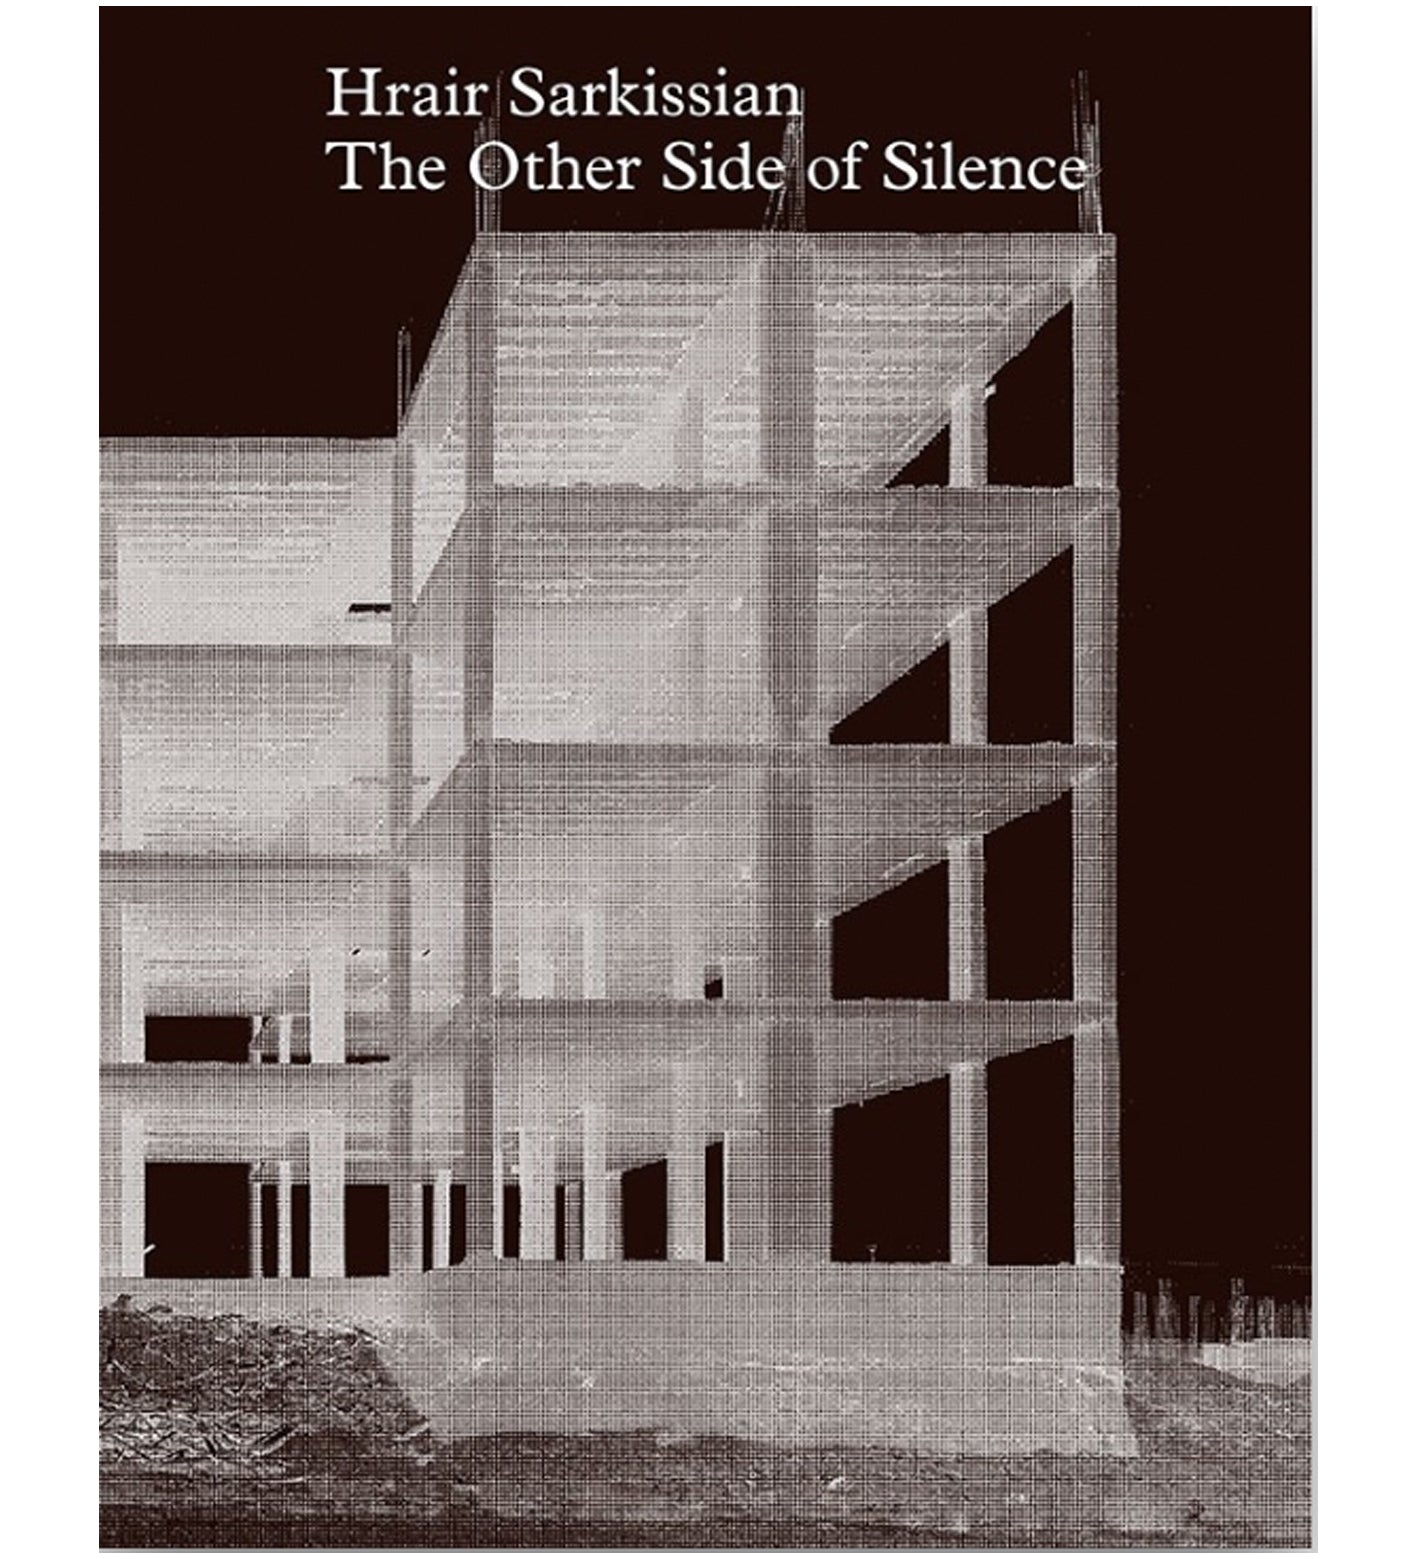 Hrair Sarkissian: The Other Side of Silence